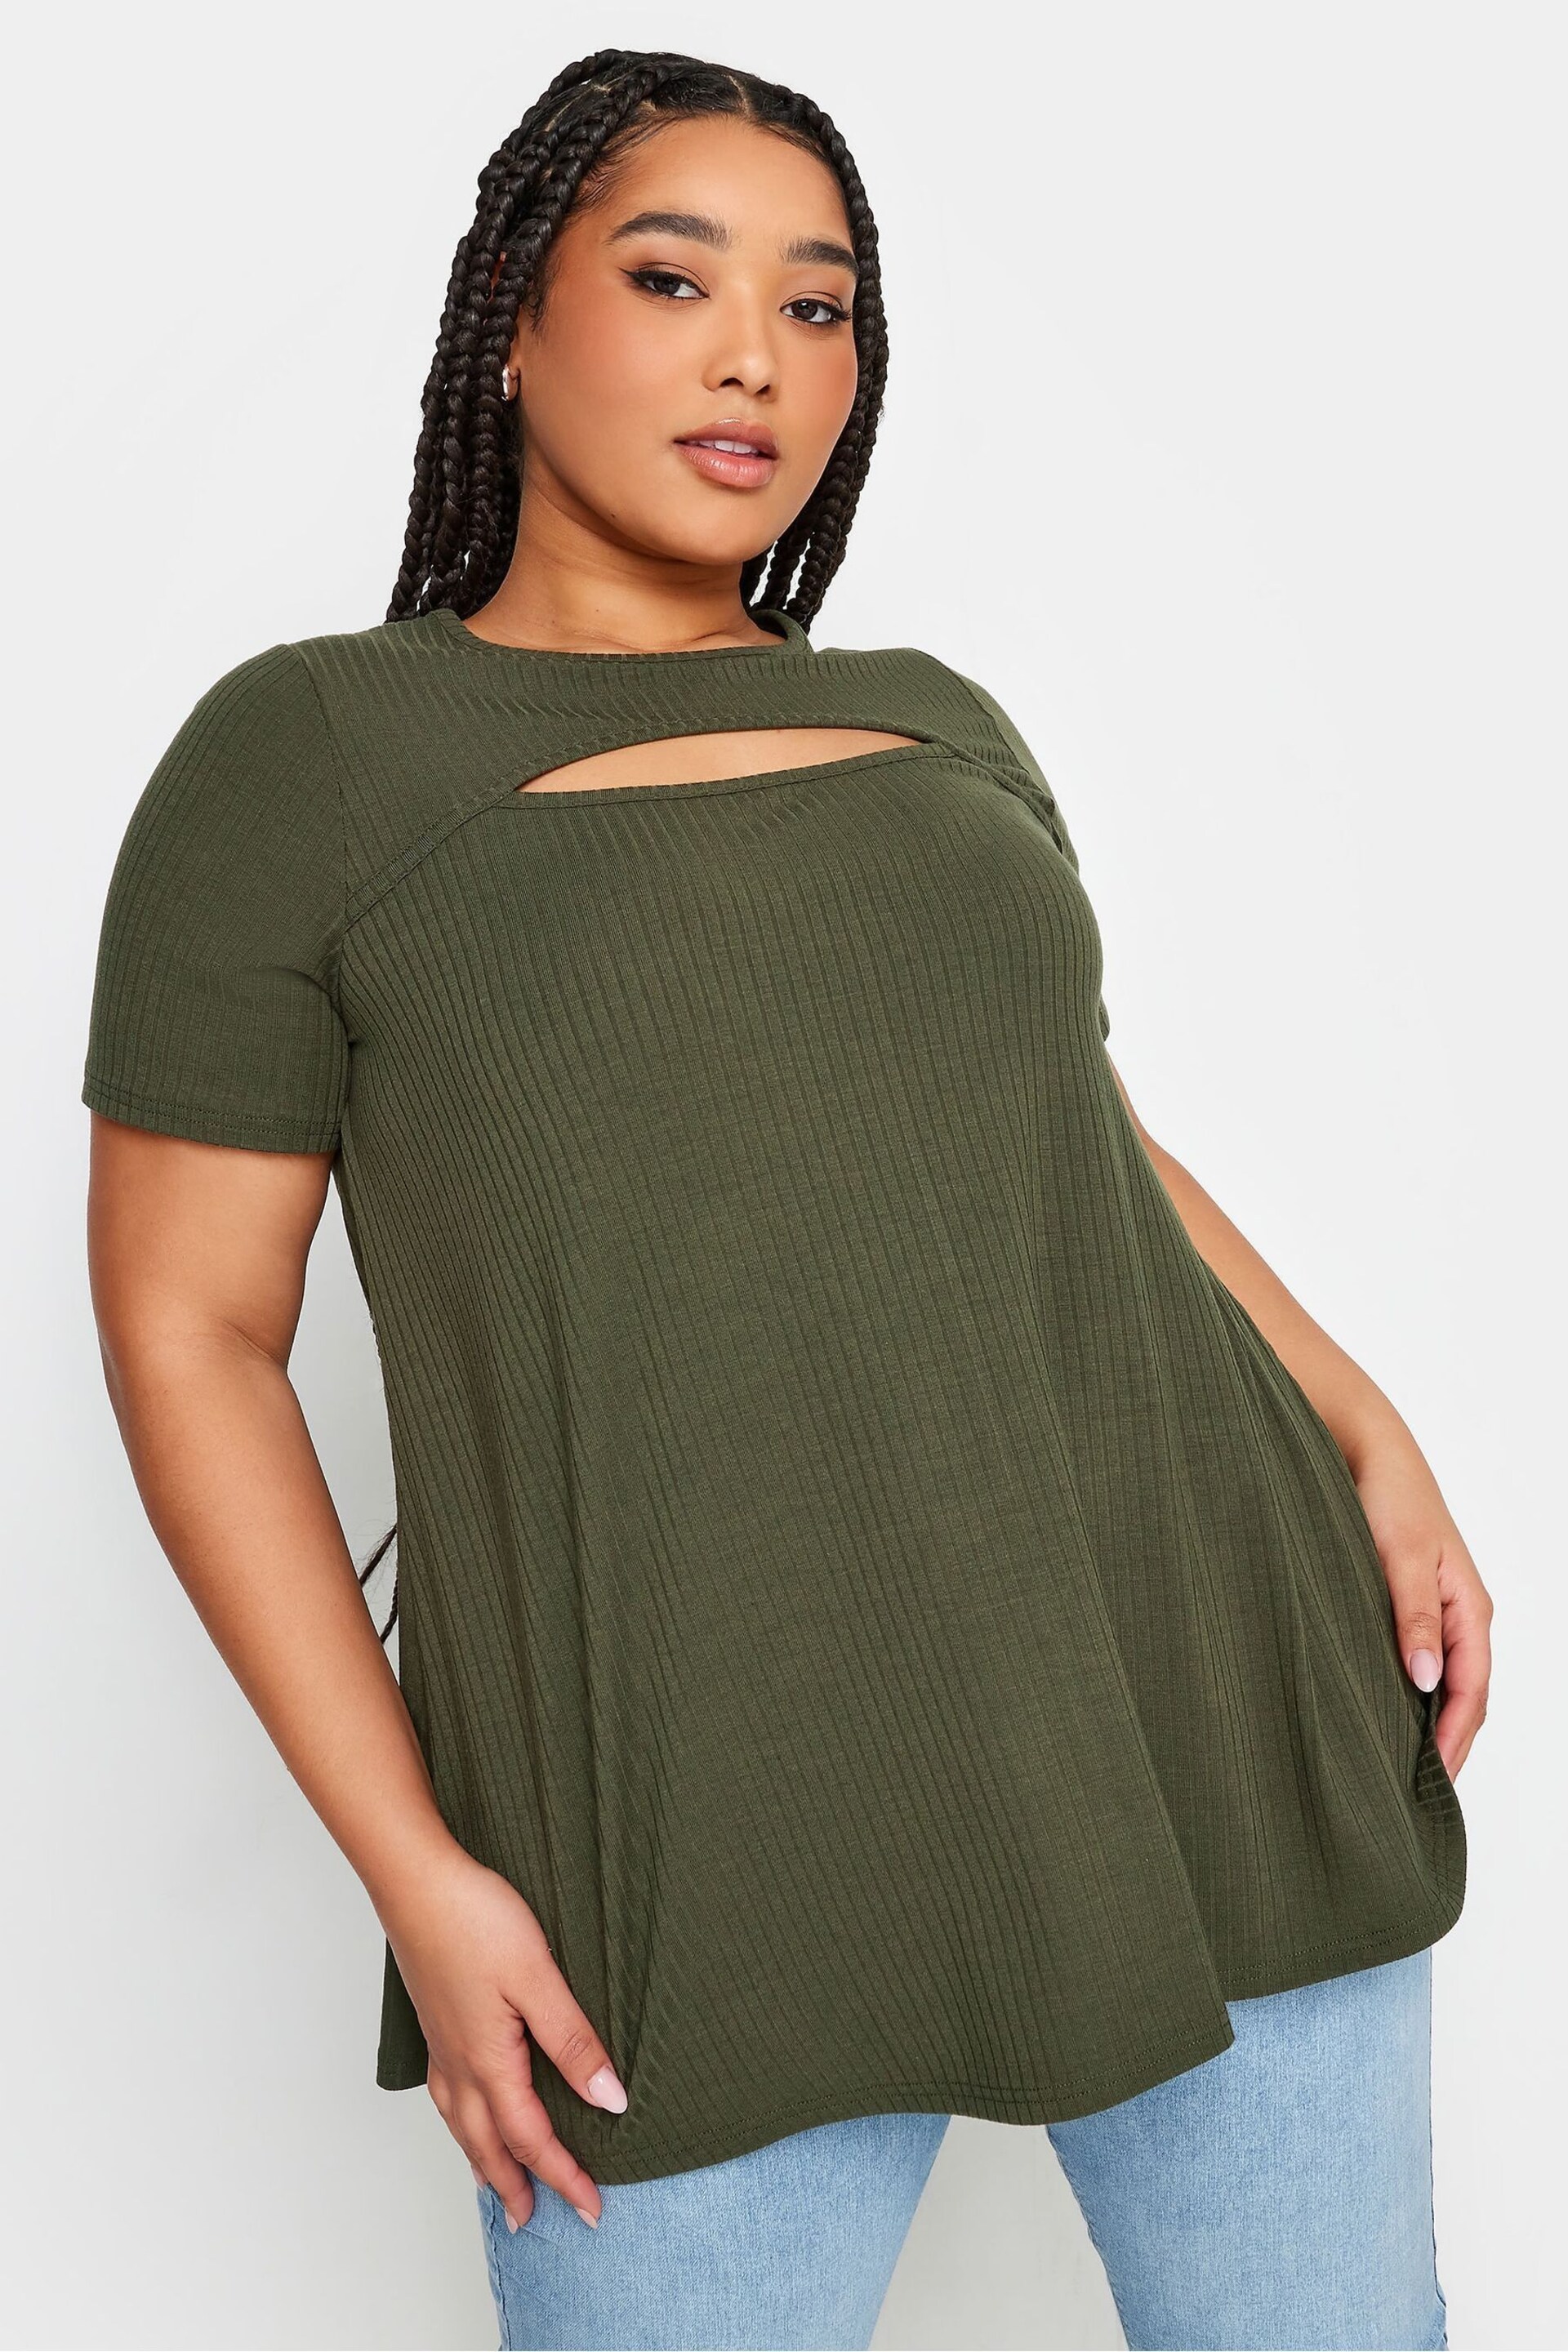 Yours Curve Khaki Green Ribbed Cut Out T-Shirt - Image 1 of 4